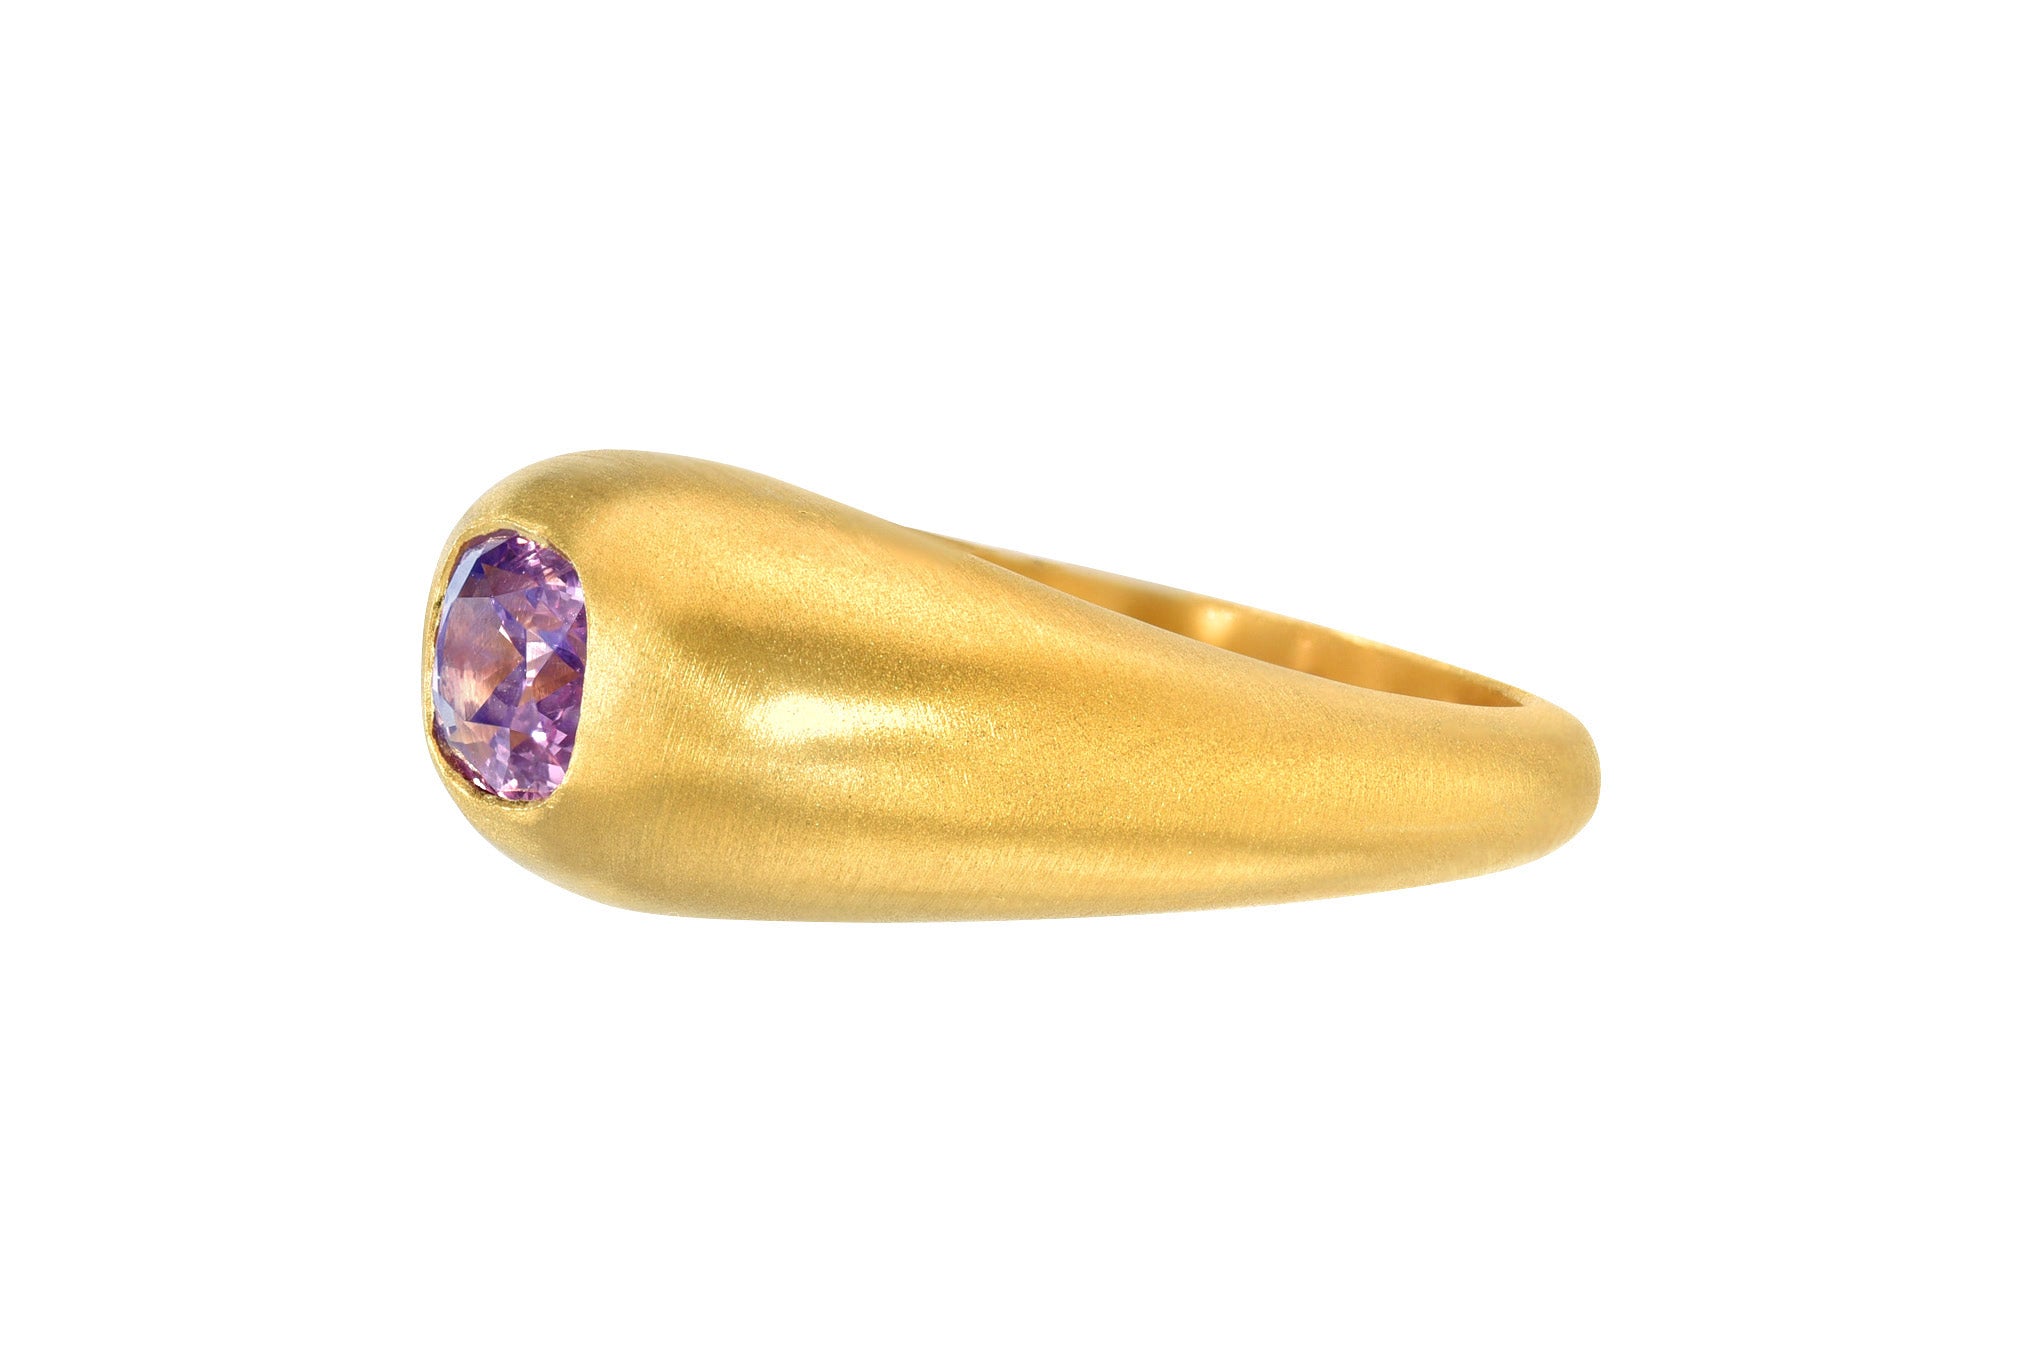 ONE OF A KIND LILAC SAPPHIRE GEM SIGNET RING